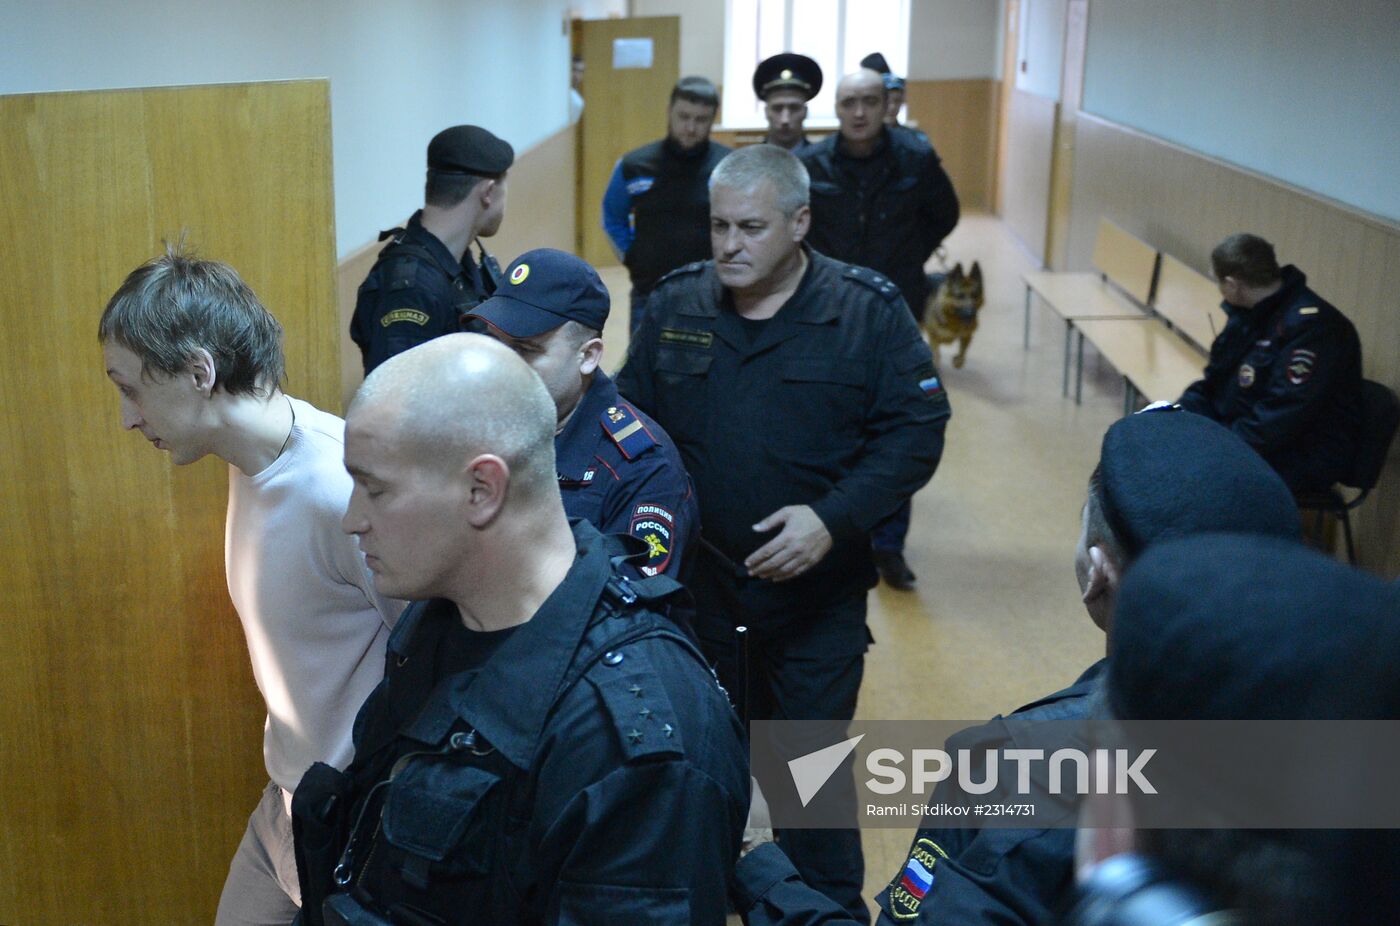 Sergei Filin summoned for questioning in case of attack on him